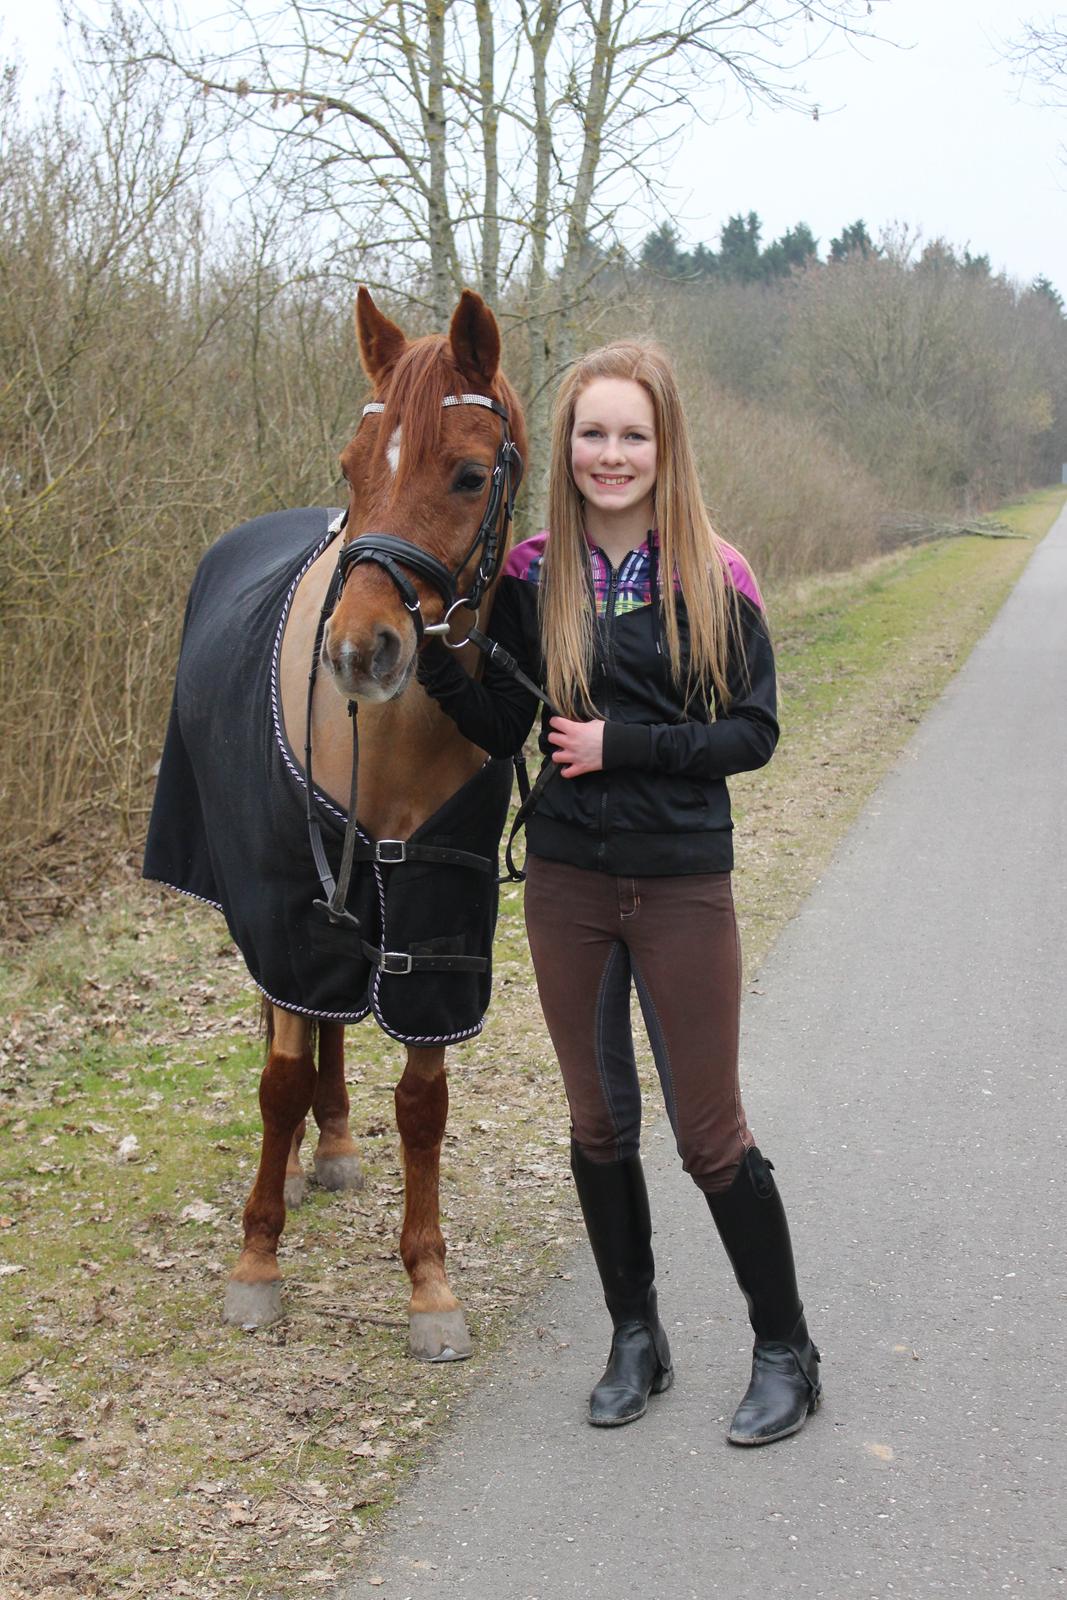 Tysk Sportspony Aladin *Den Bedste* - I'm overboard
And I need your love to pull me up
I can't swim on my own
It's too much
Feels like I'm drowning without your love,
So throw yourself out to me, my lifesaver <3 billede 18